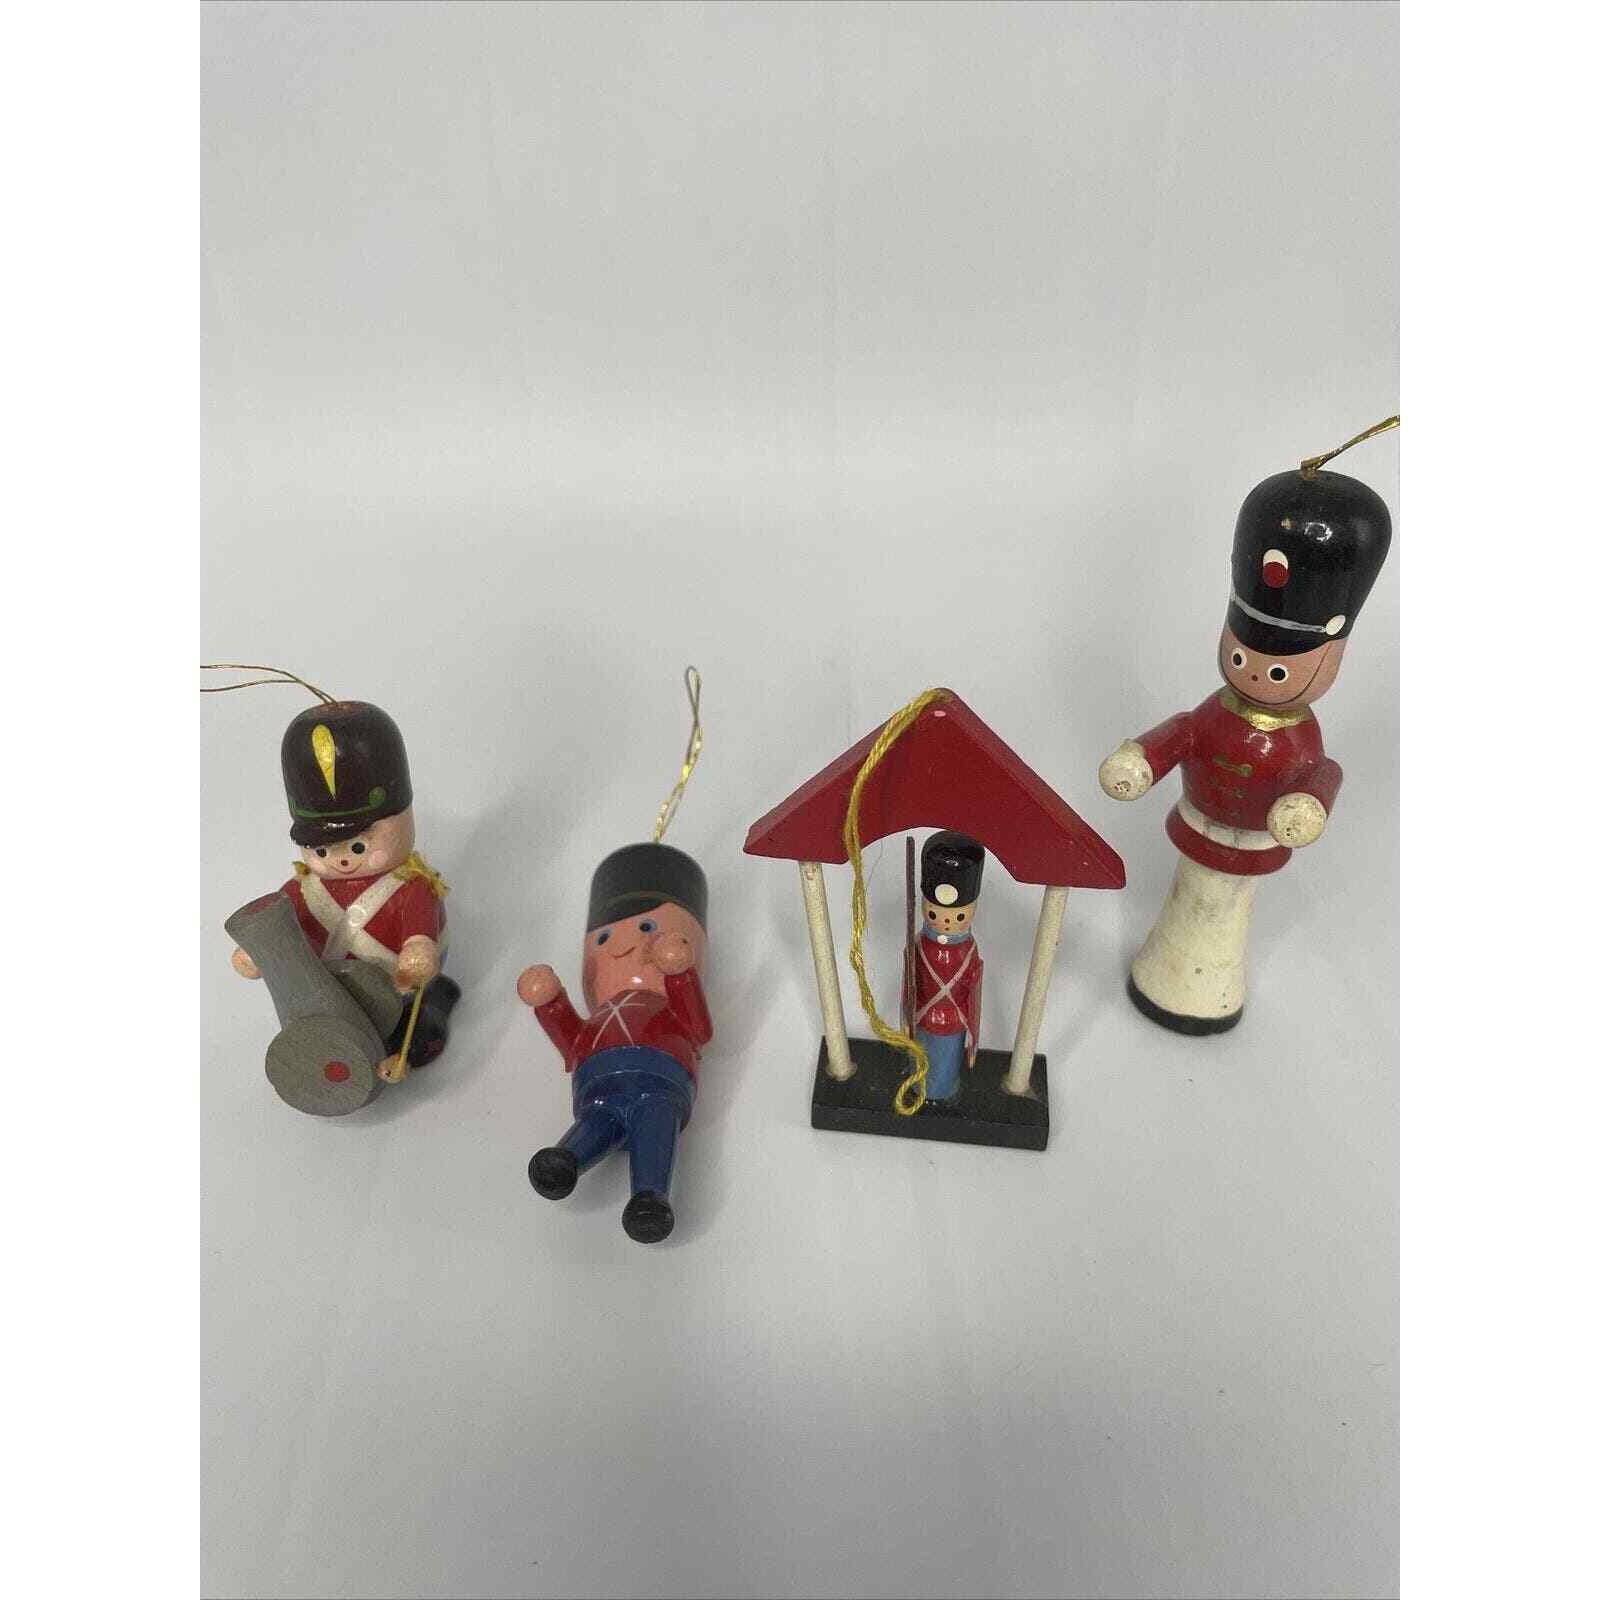 VTG Wooden Christmas Ornaments Toy Soldiers Music 2.5-3” 1940s Taiwan *read